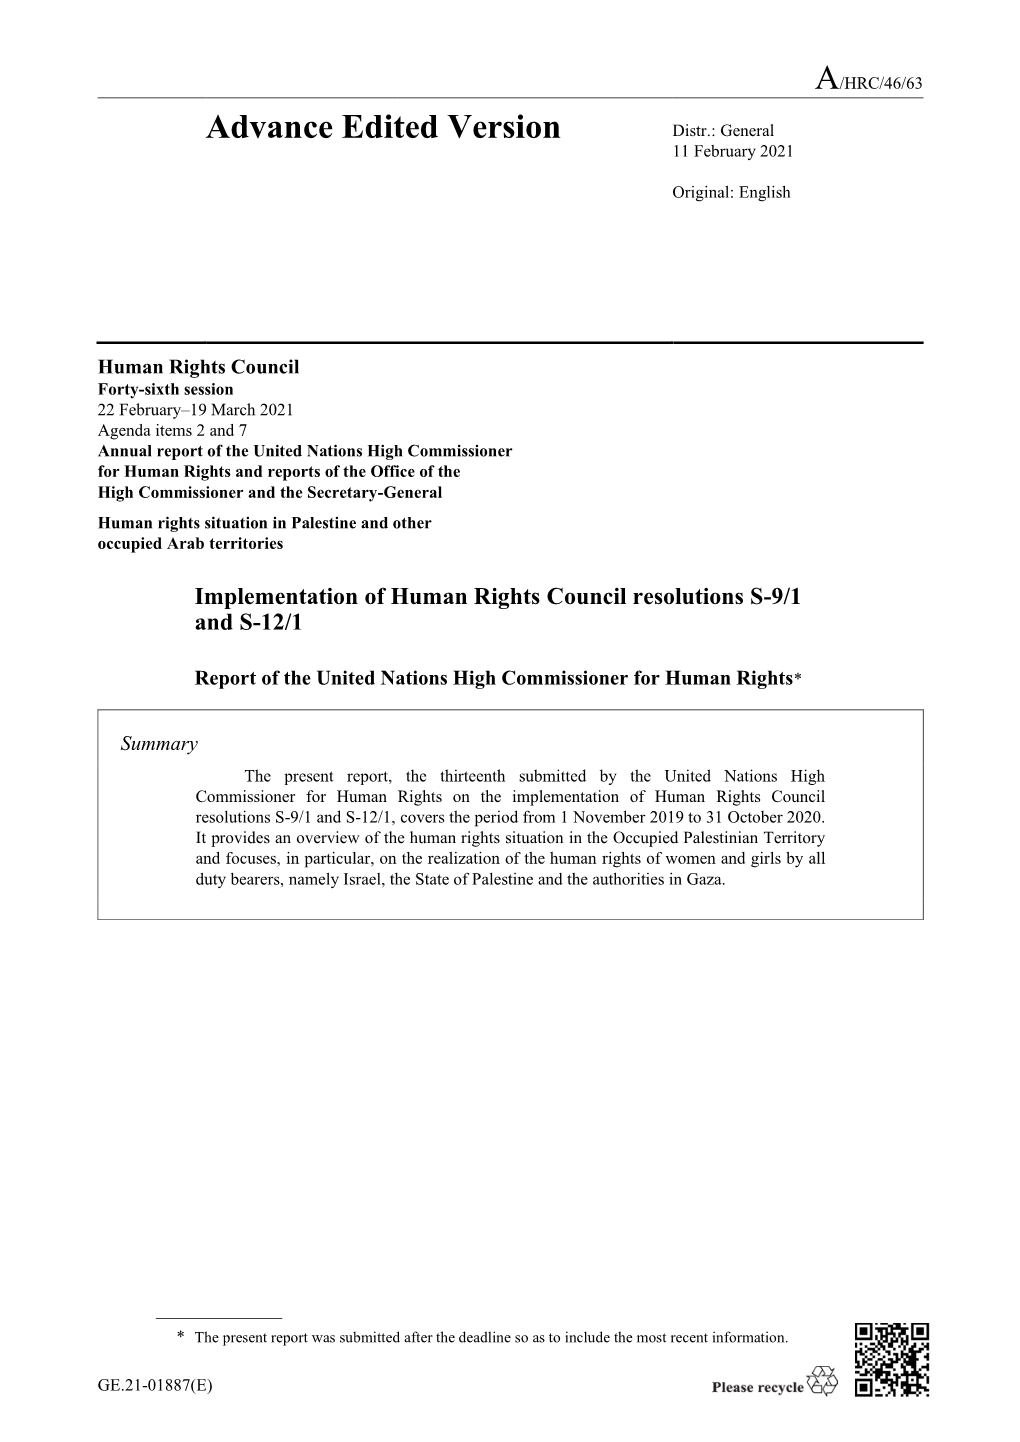 Report of the United Nations High Commissioner for Human